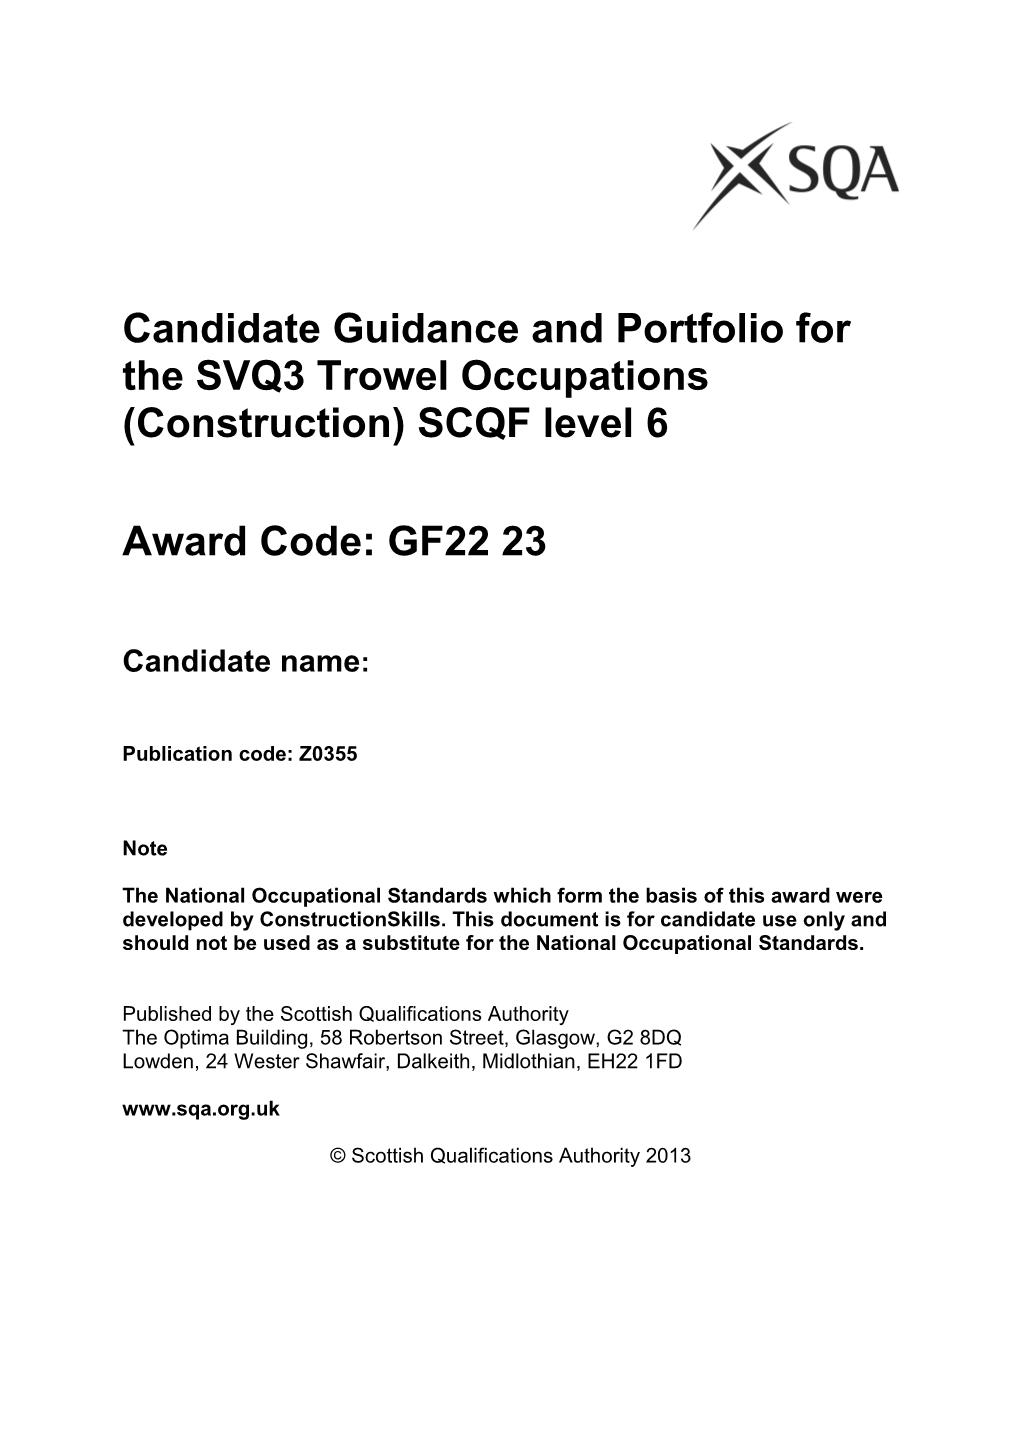 Candidate Guidance and Portfolio for the SVQ3 Trowel Occupations (Construction) SCQF Level 6